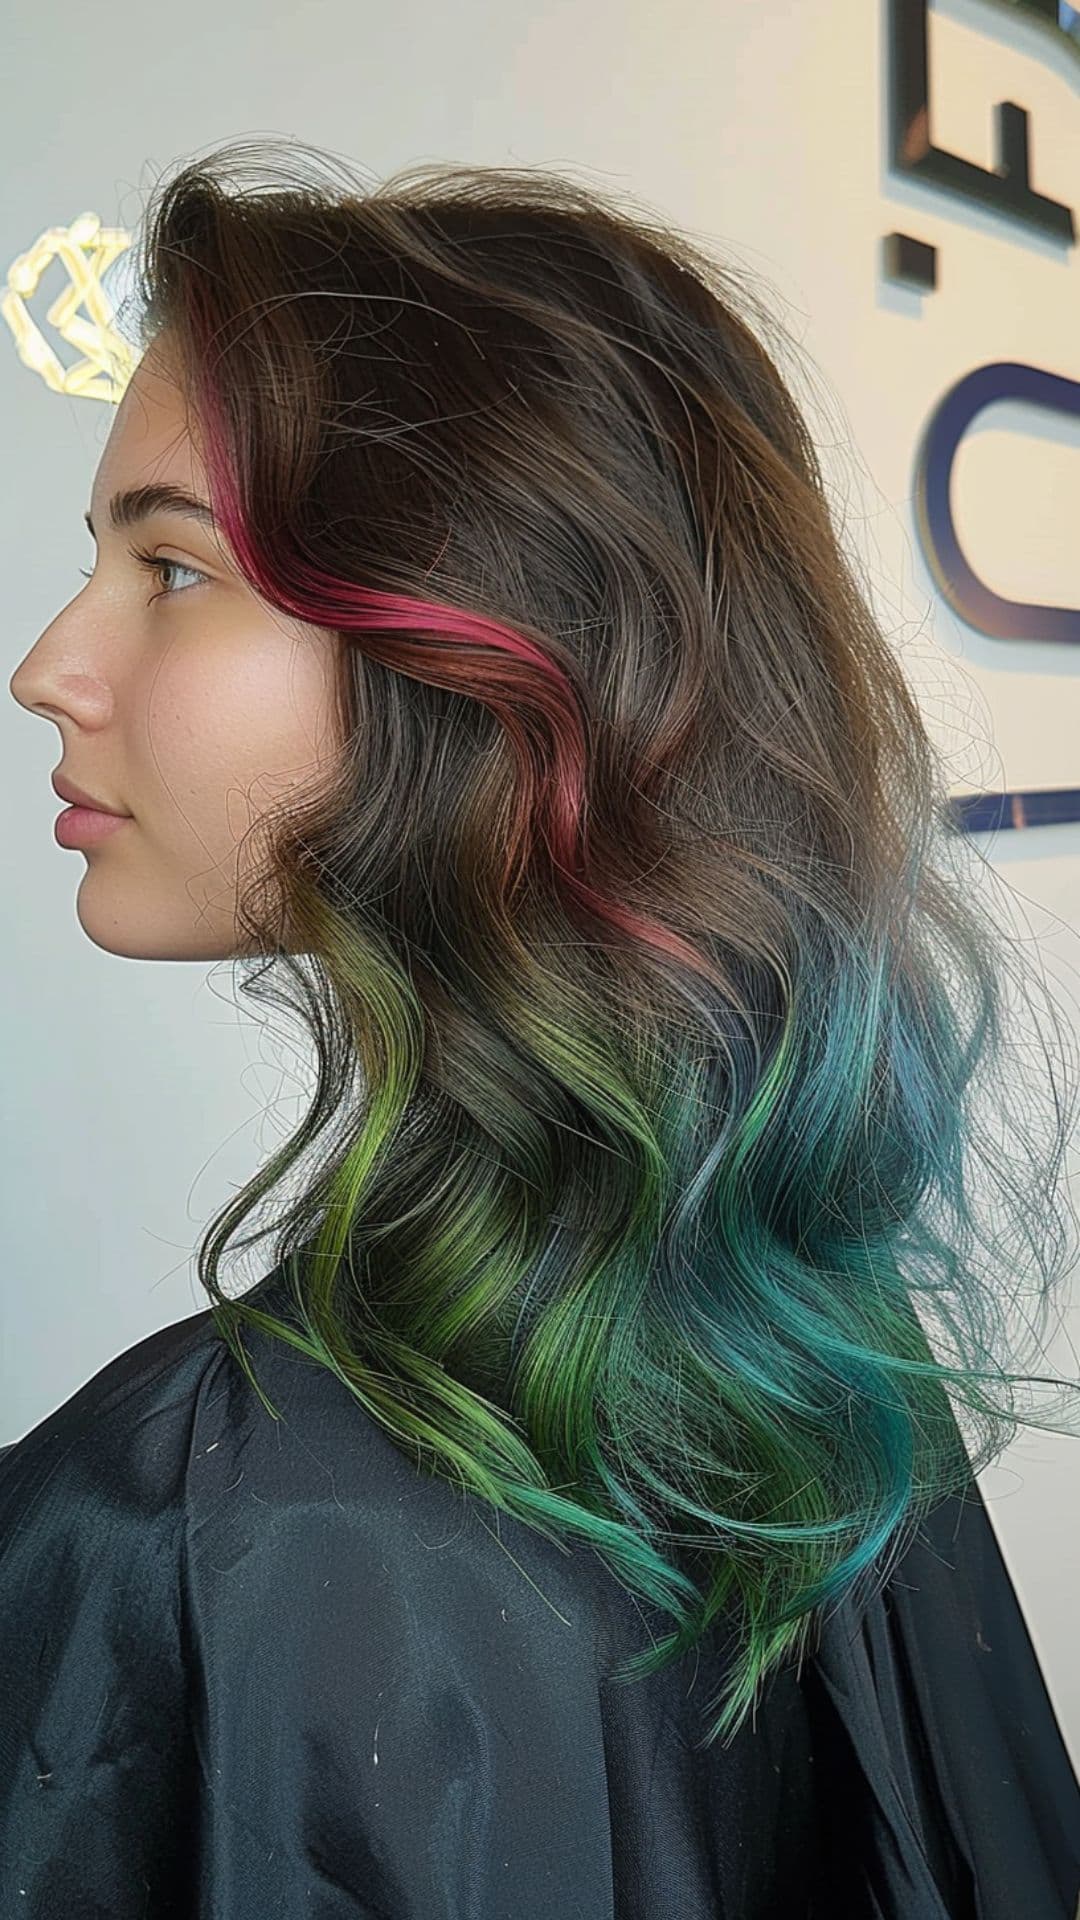 A woman modelling a peacock inspired hair color.